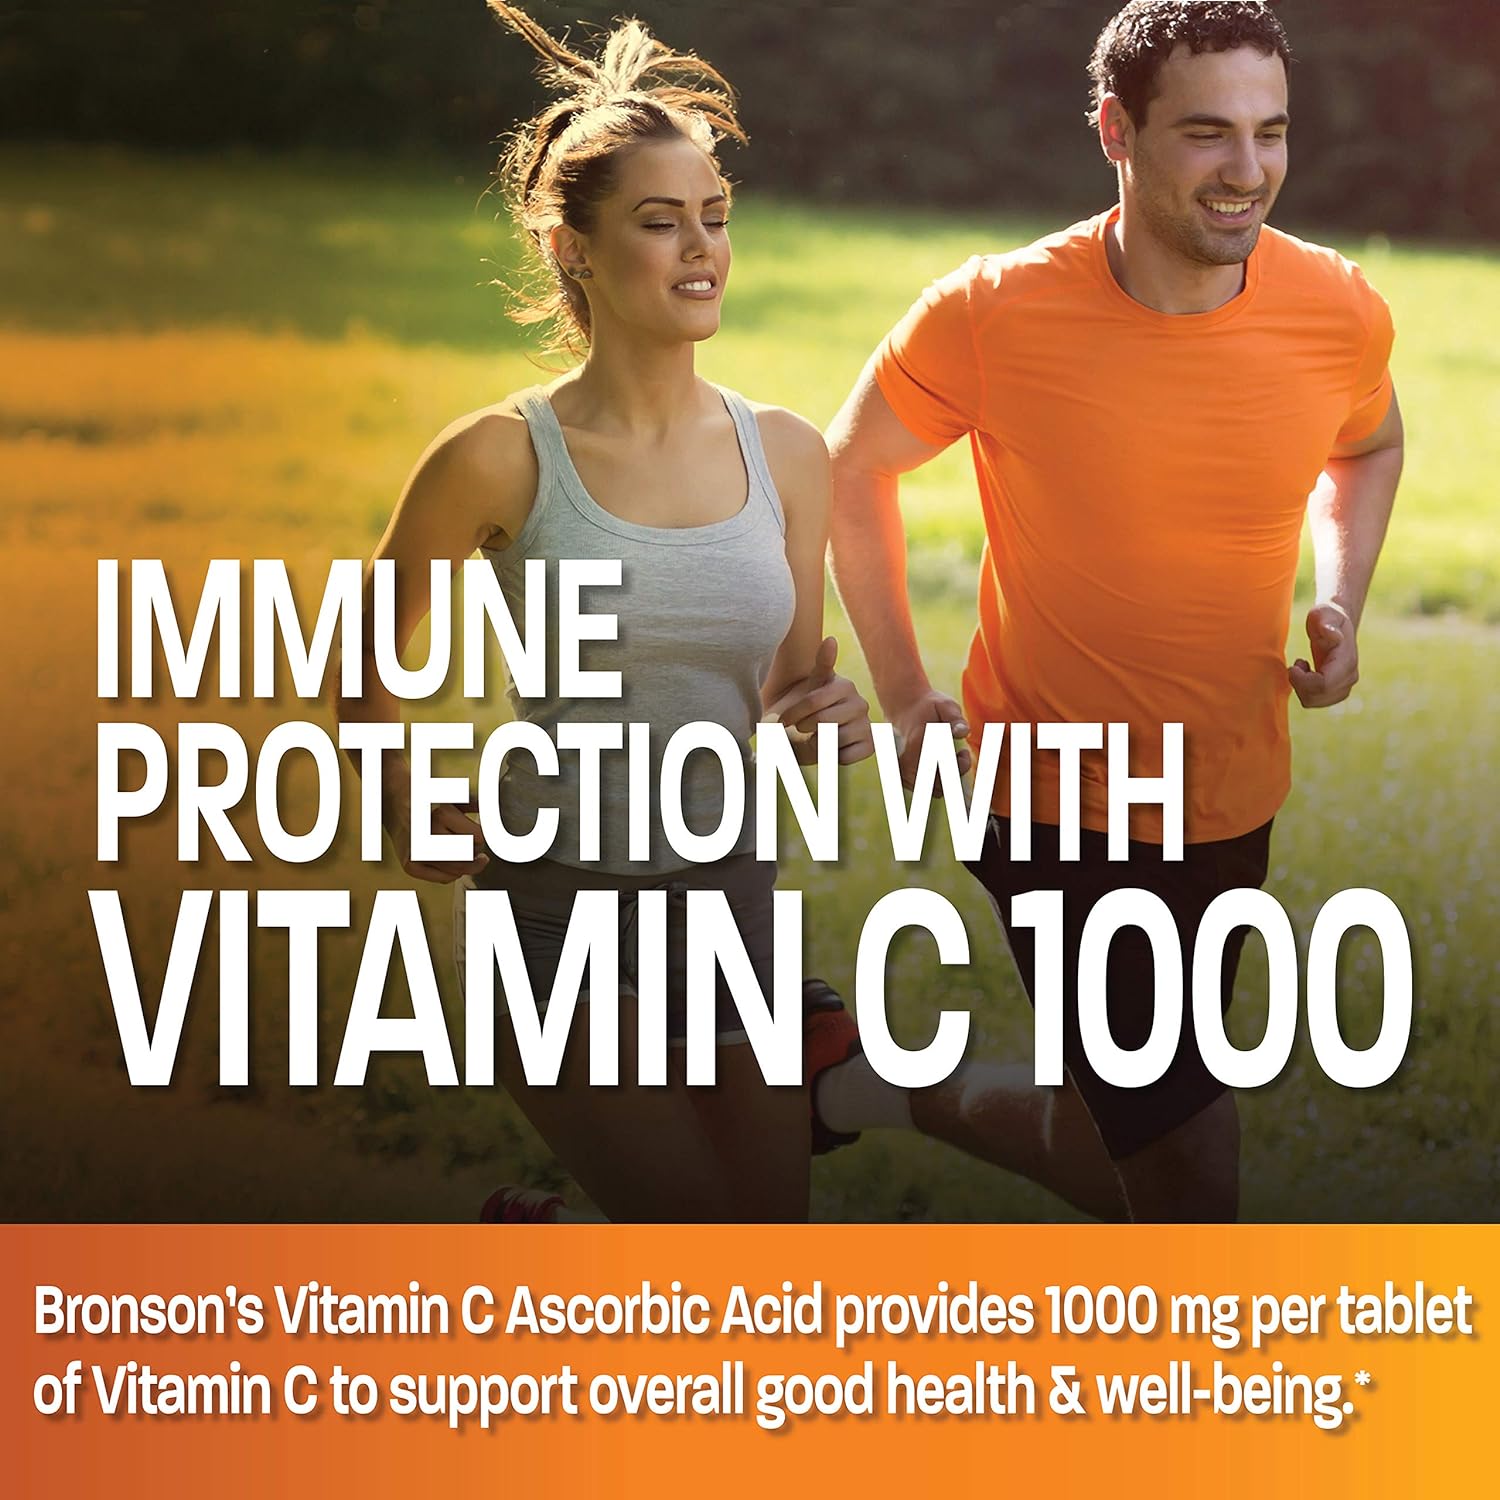 Vitamin C 1000 mg Premium Non-GMO Ascorbic Acid - Maintains Healthy Immune System, Supports Antioxidant Protection - 250 Tablets : Health & Household